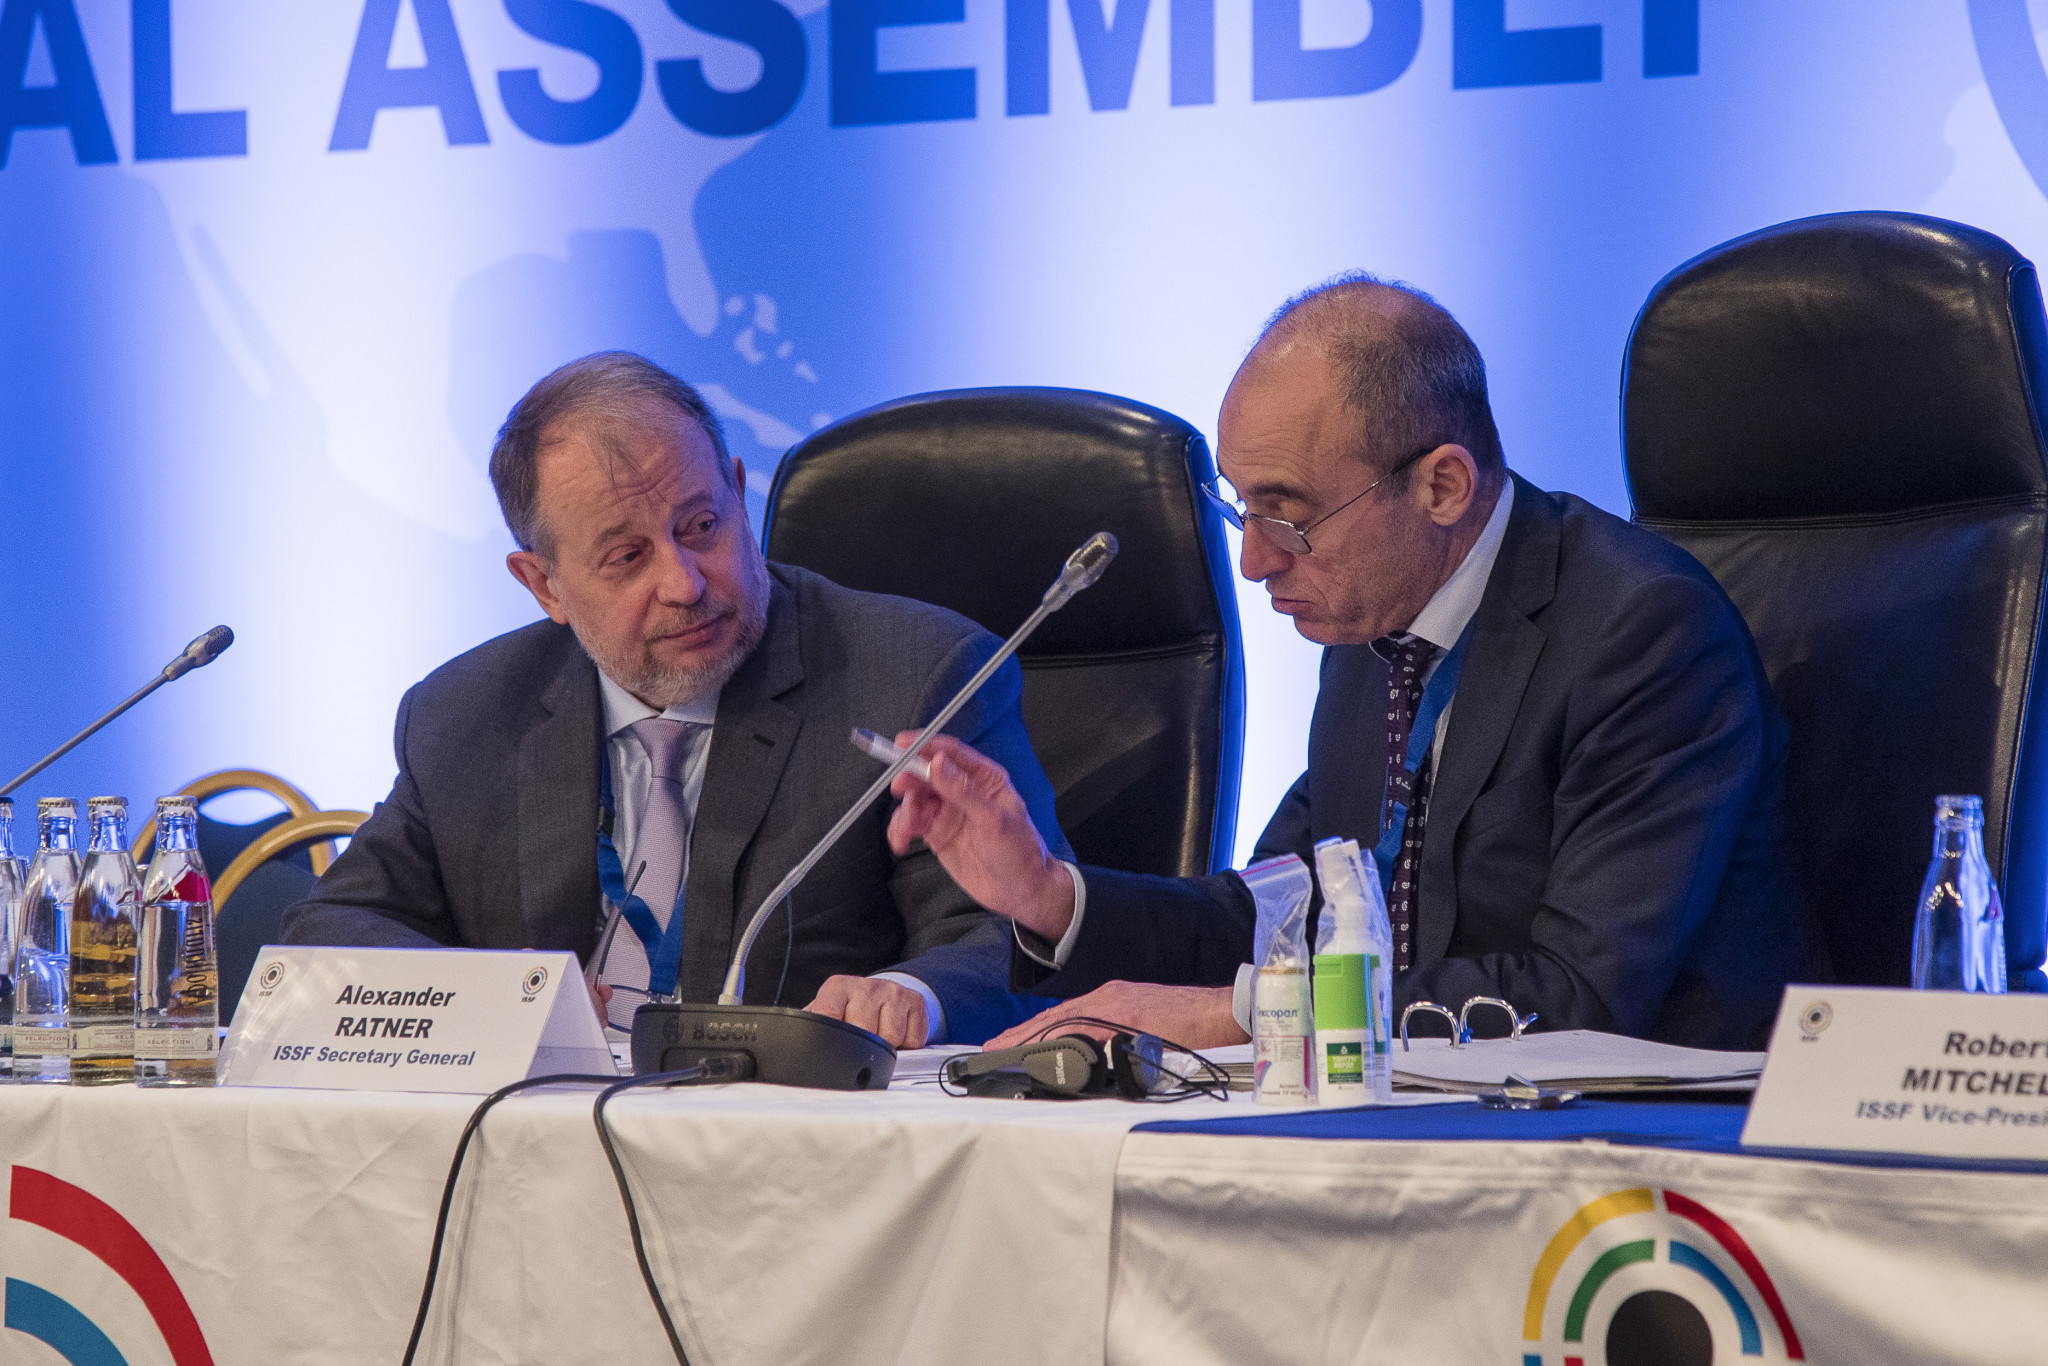 Russian Alexander Ratner, right, is secretary general of the ISSF under Vladimir Lisin, left, as well as President of the European Shooting Confederation ©ISSF